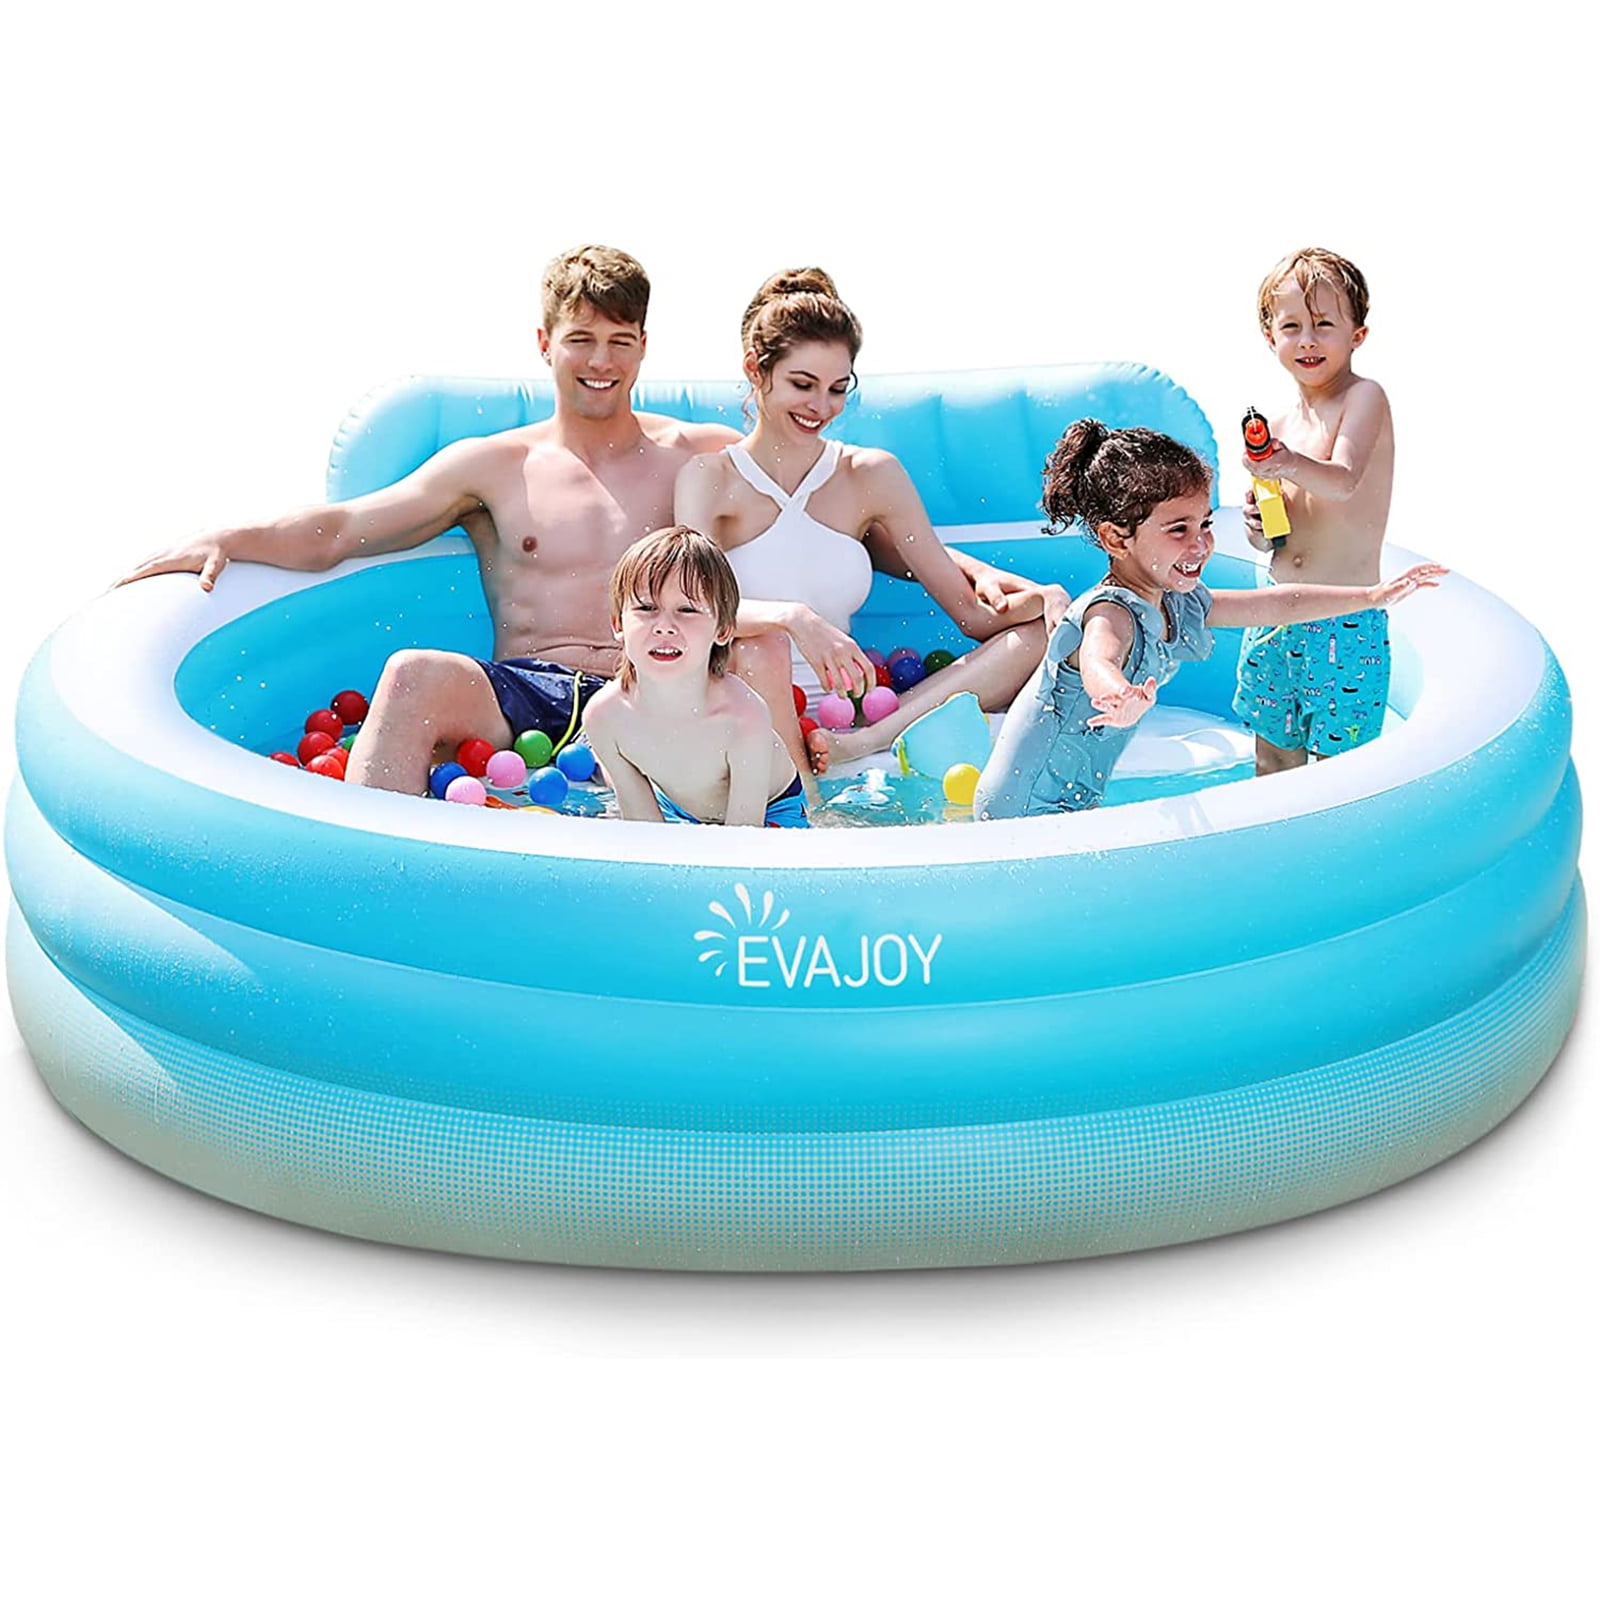 Large Inflatable swimming pool For Adults Kids Family Fast Shipping 7-15 days 